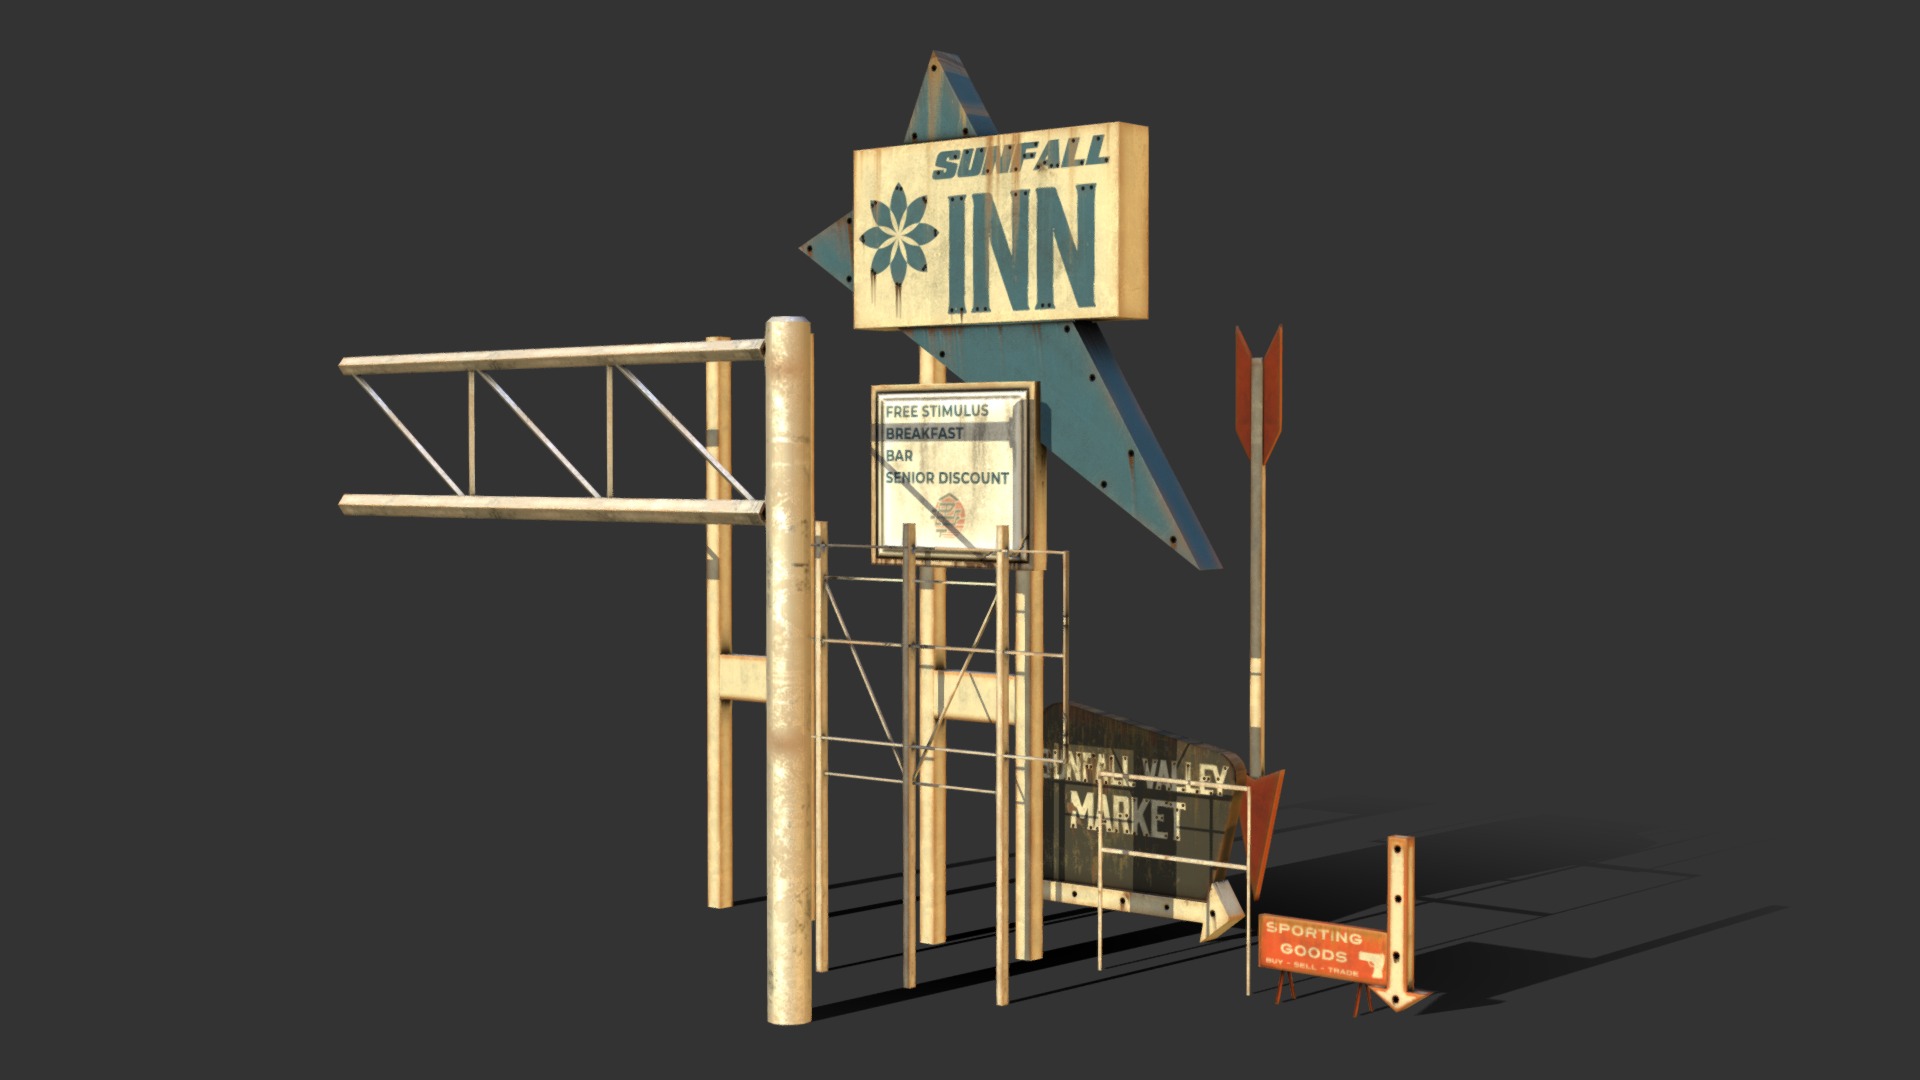 A set of old signs and signboards for an abandoned city scene I'm working on. Went with more of a old, midcentury sort of feel for them.

Made with 3DSMax and Substance Painter 3d model